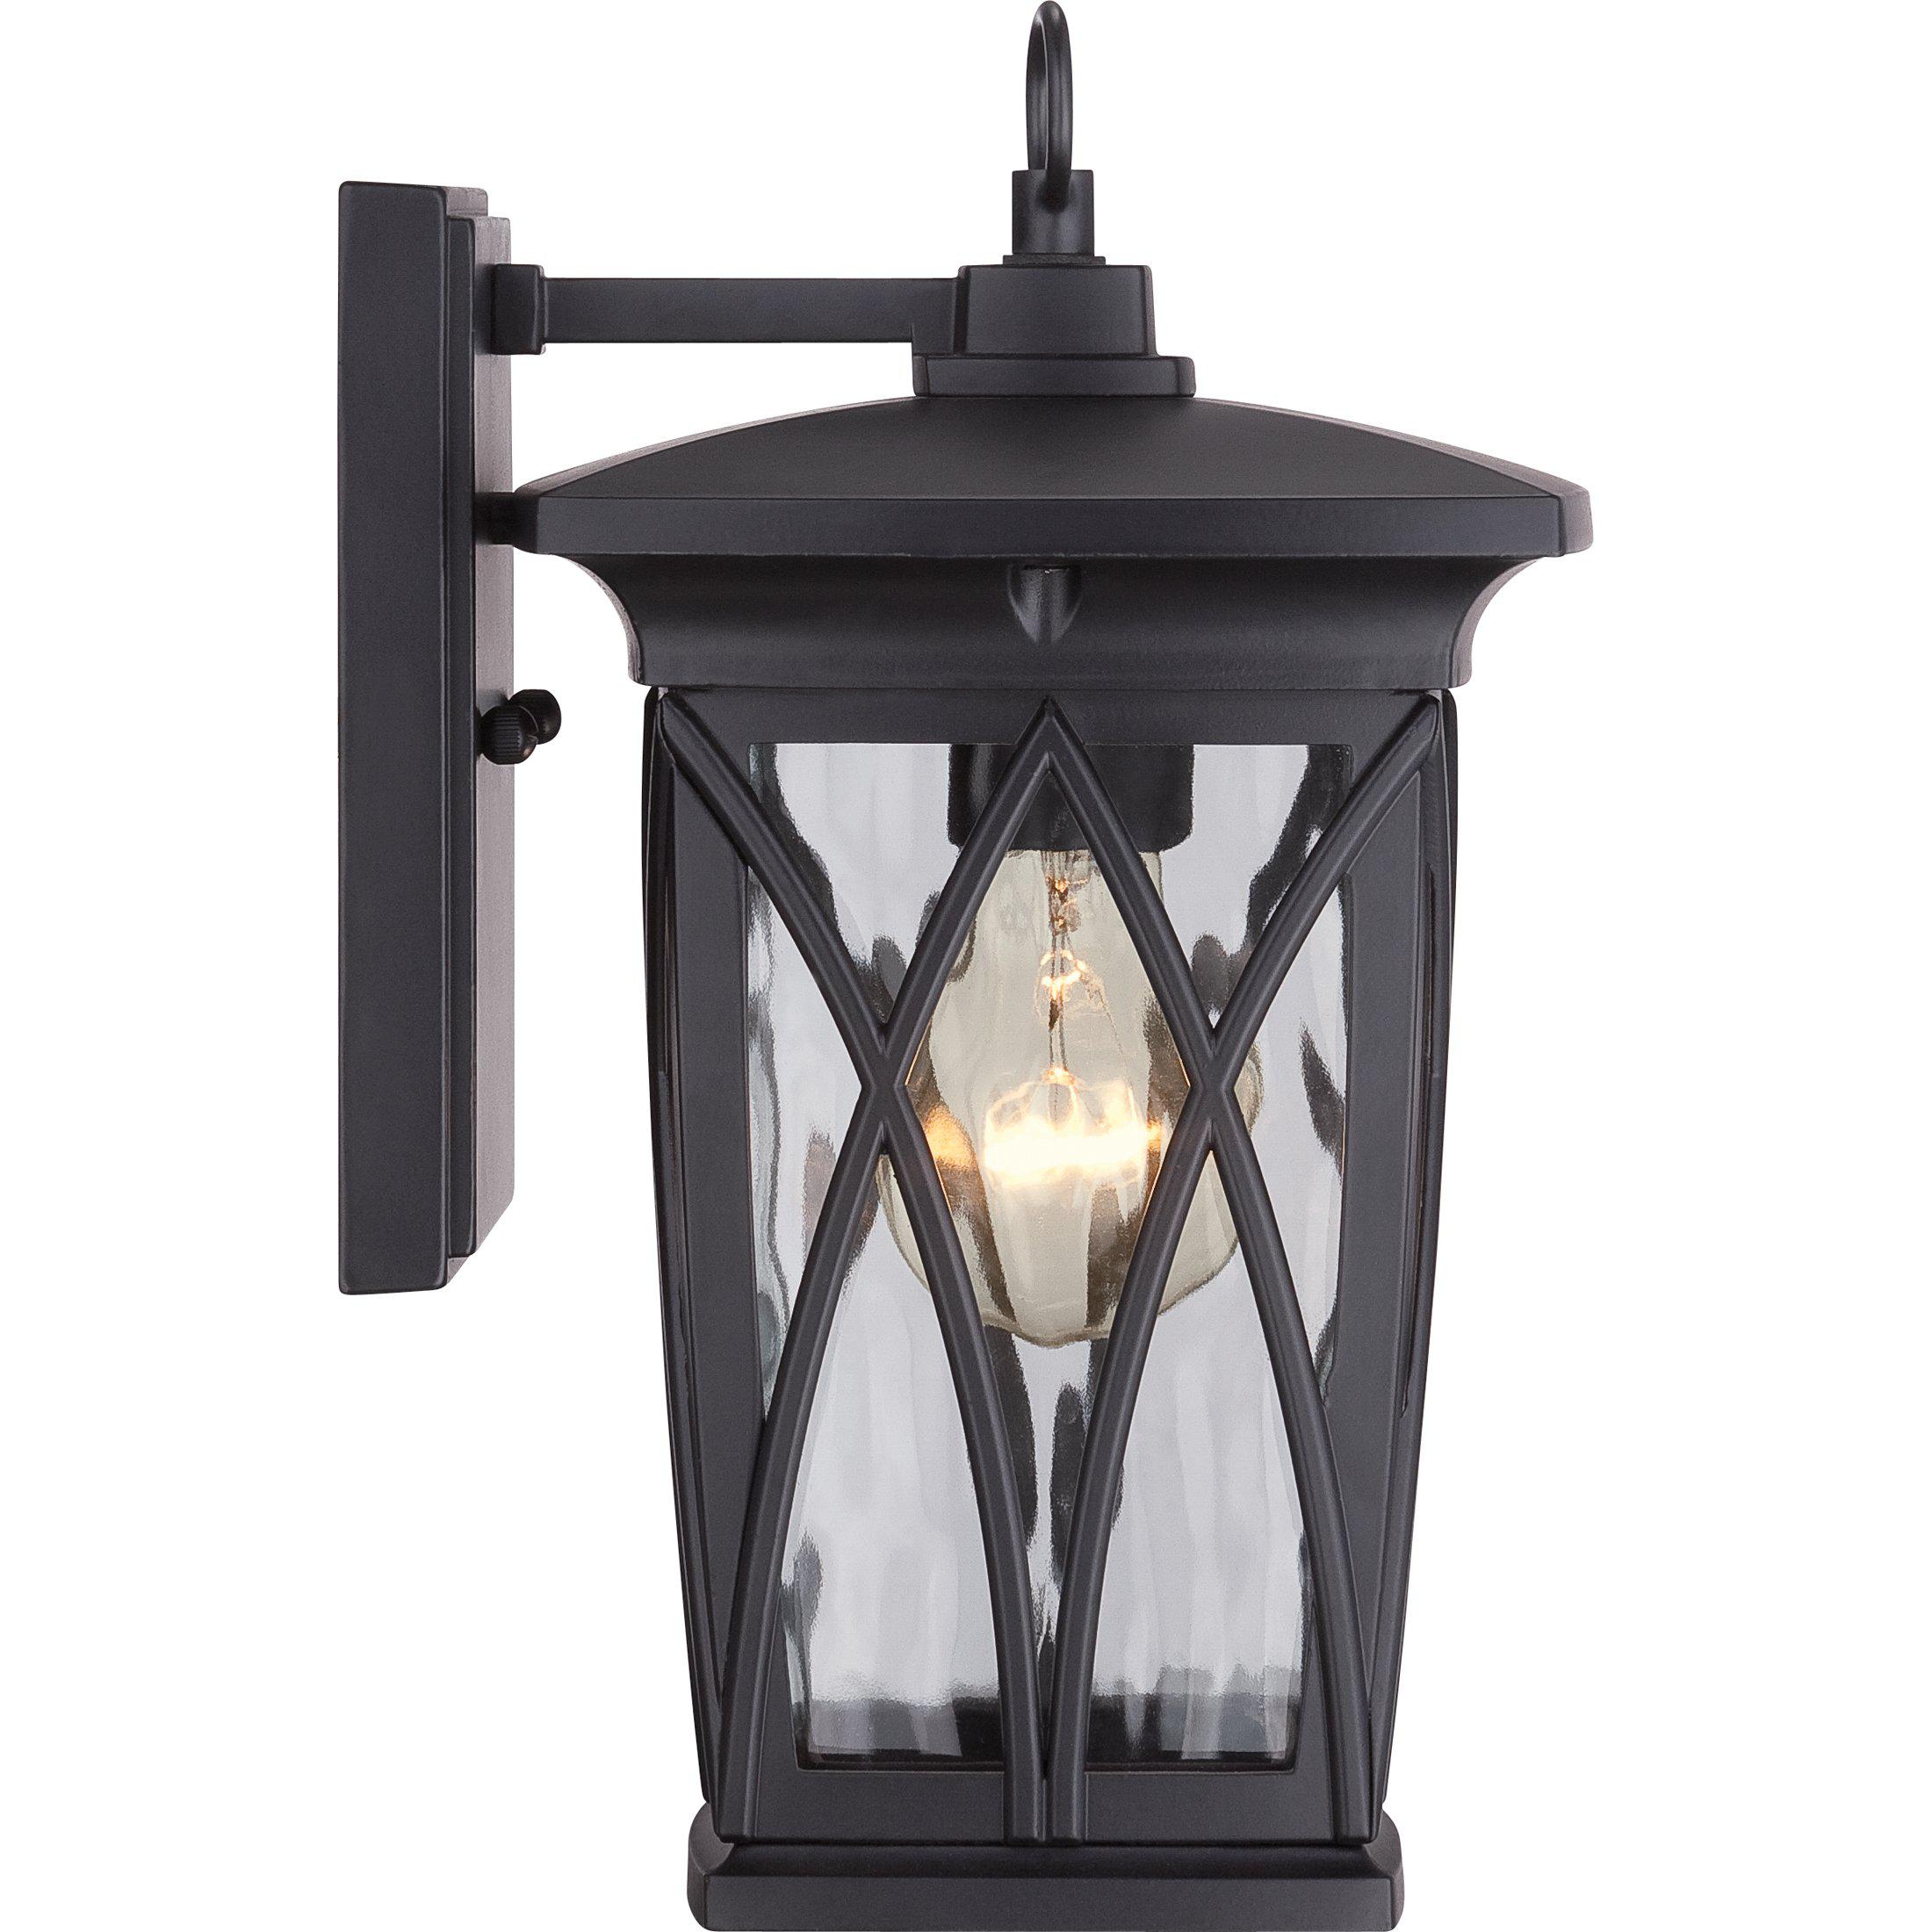 Quoizel Grover Outdoor Lantern, Small